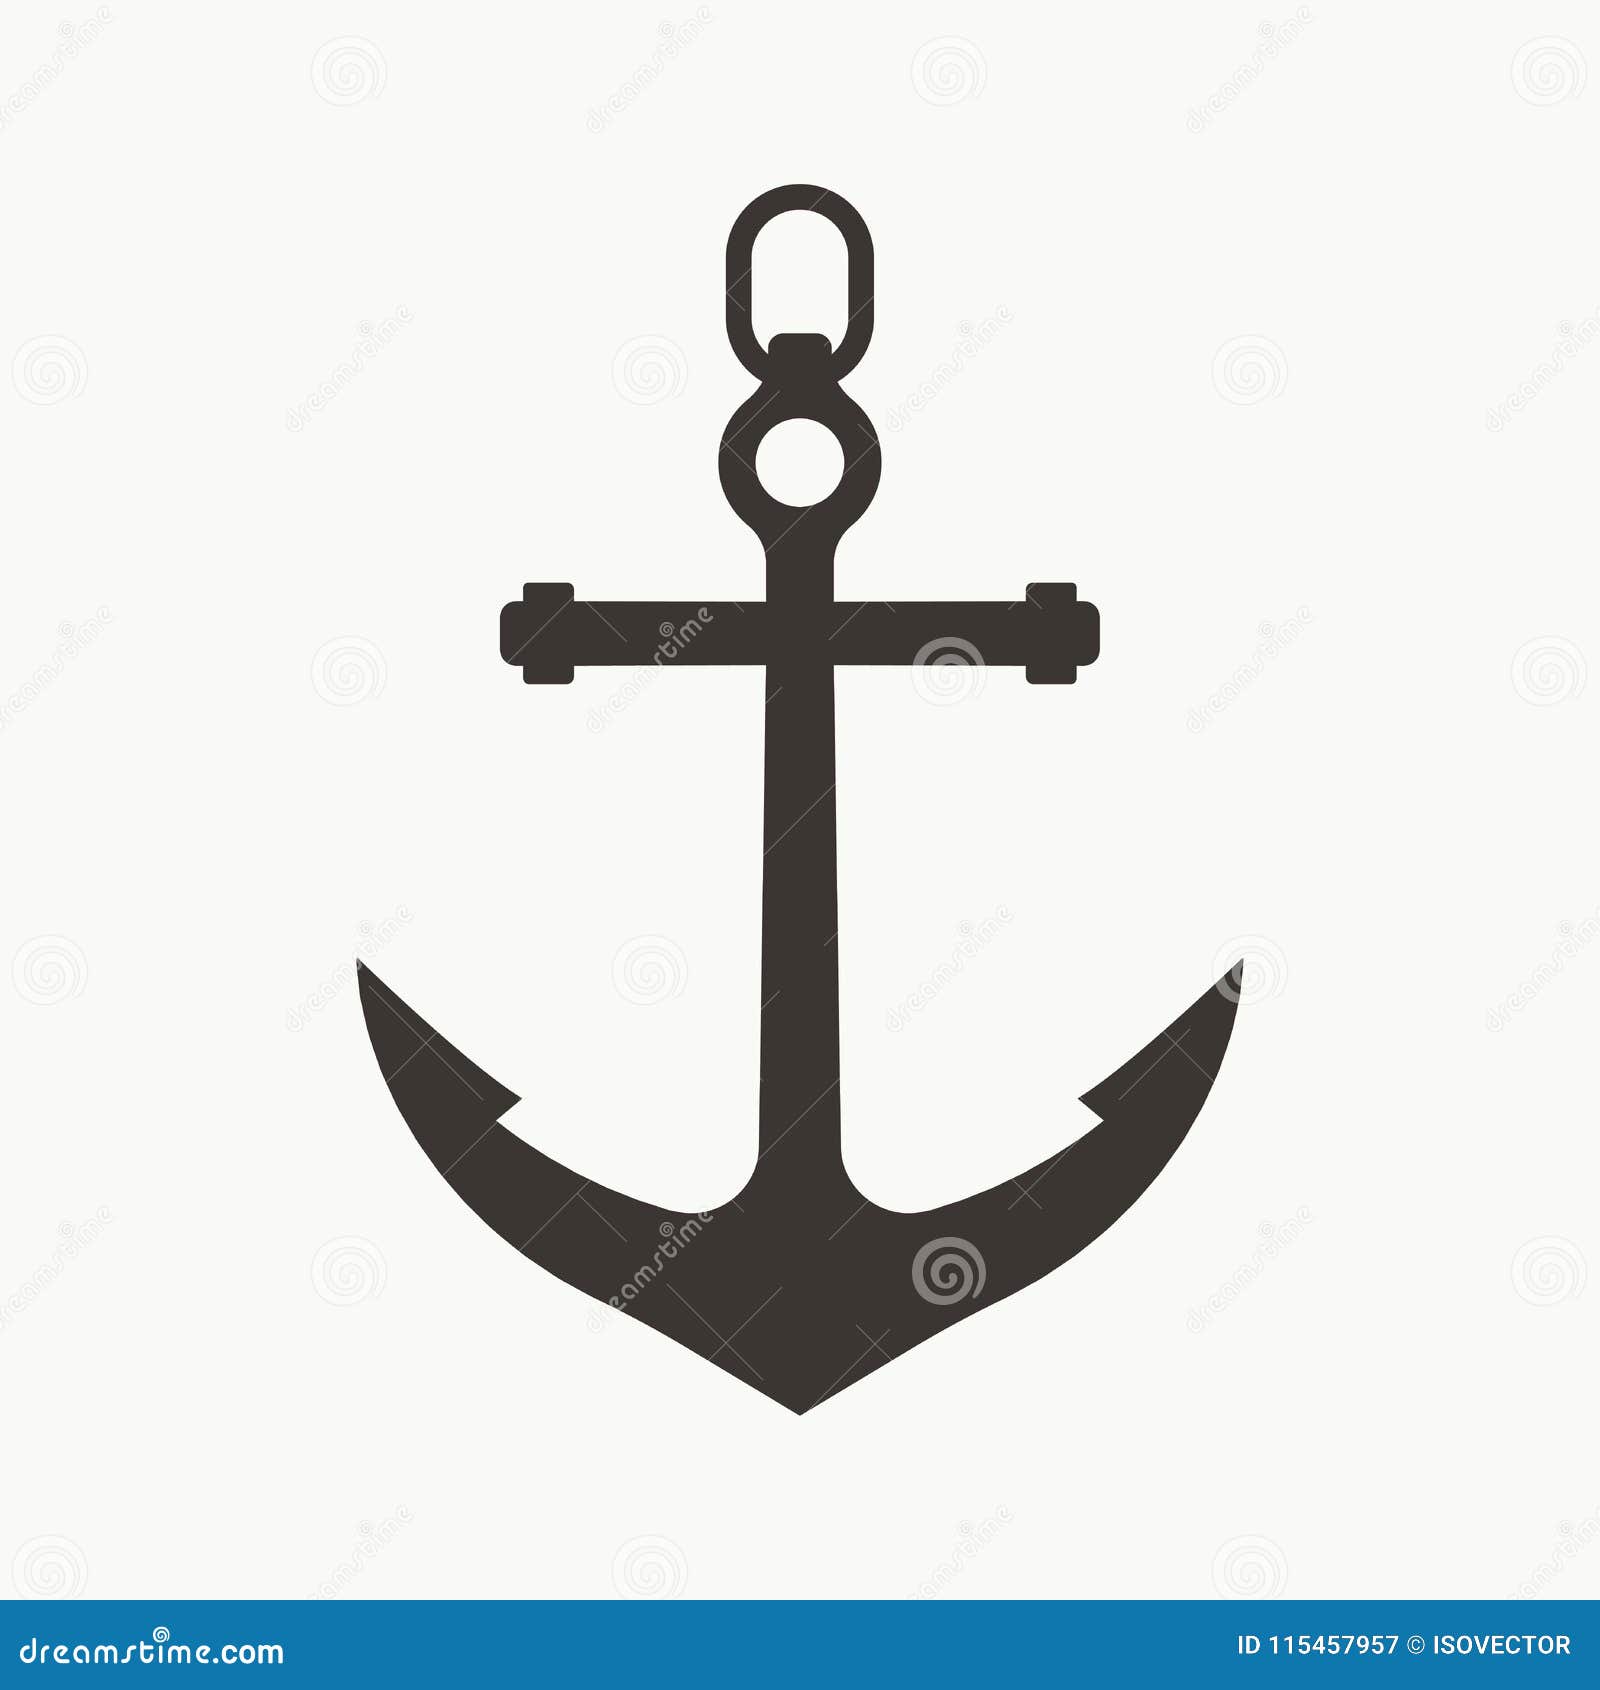 Ship Anchor Simple Icon stock vector. Illustration of black